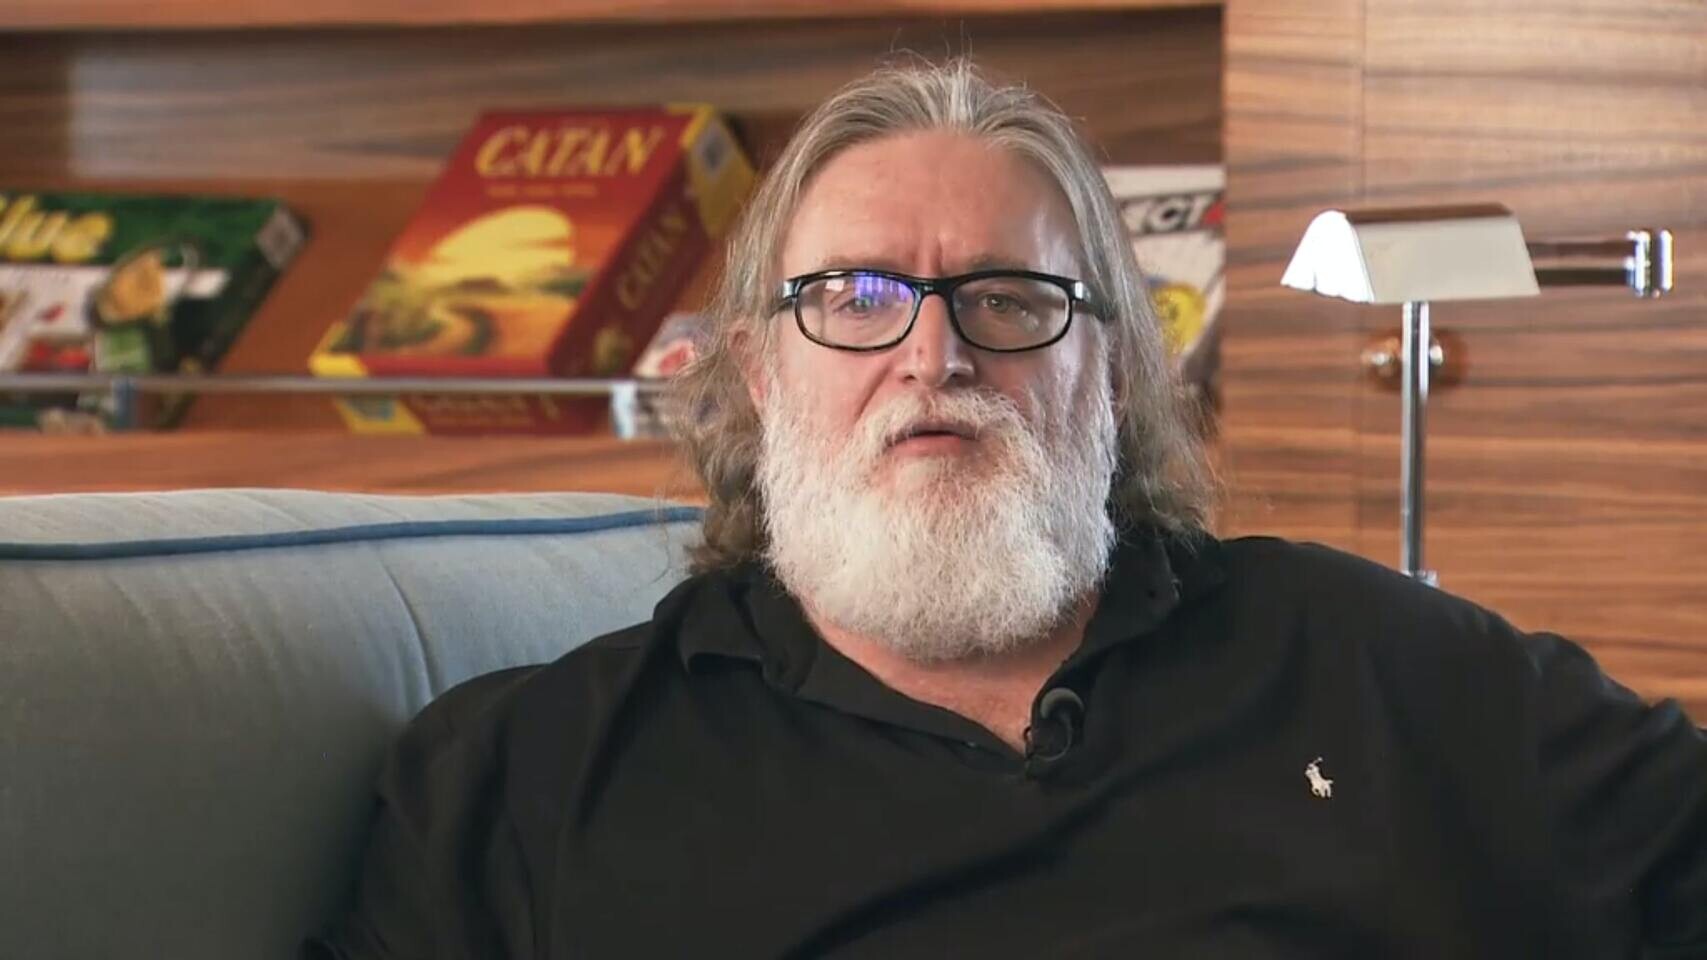 Steam Deck 2 Is Already Planned, Confirms Gabe Newell